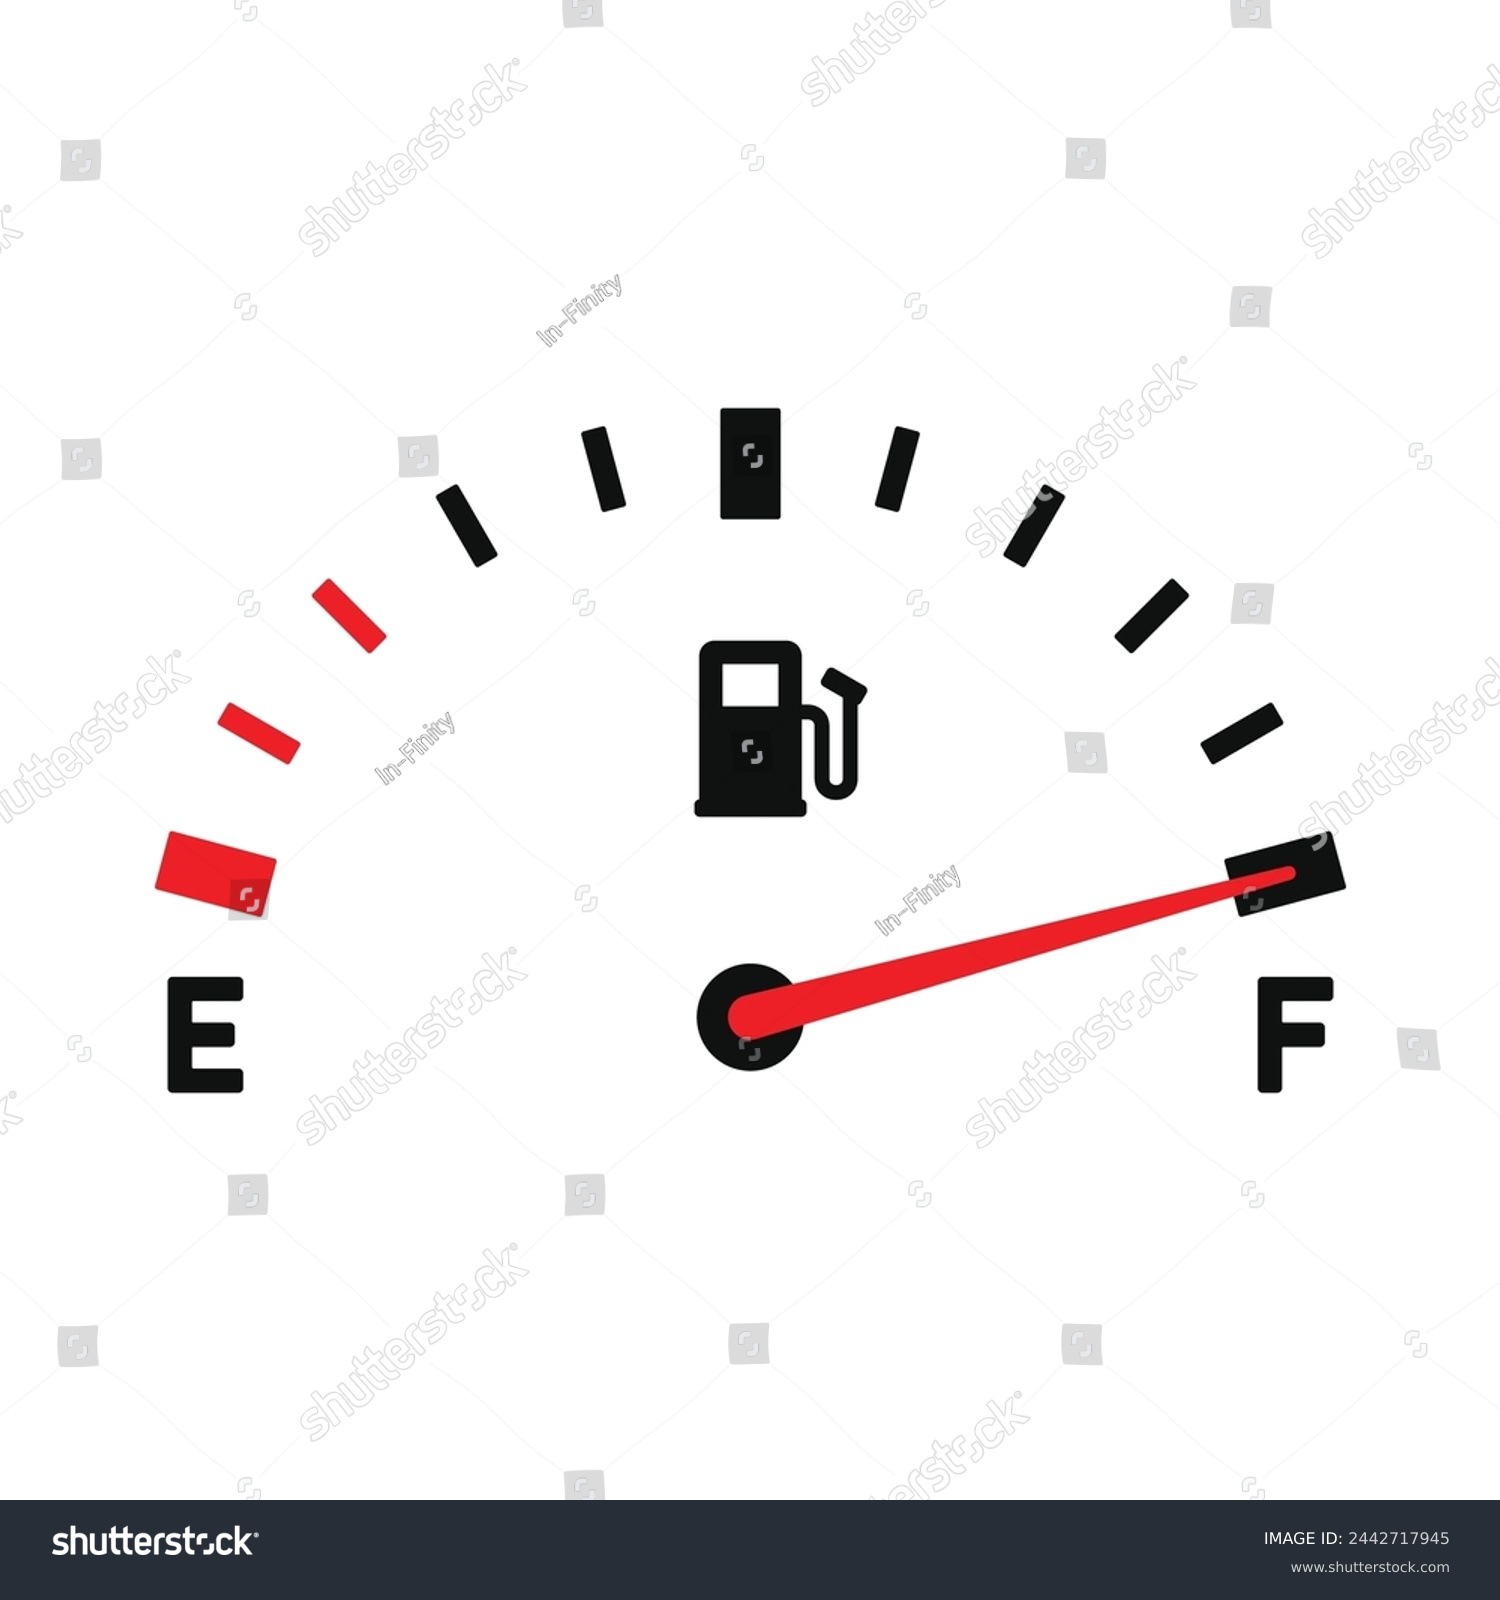 SVG of Fuel Indicator Panel on White Background. Vector svg